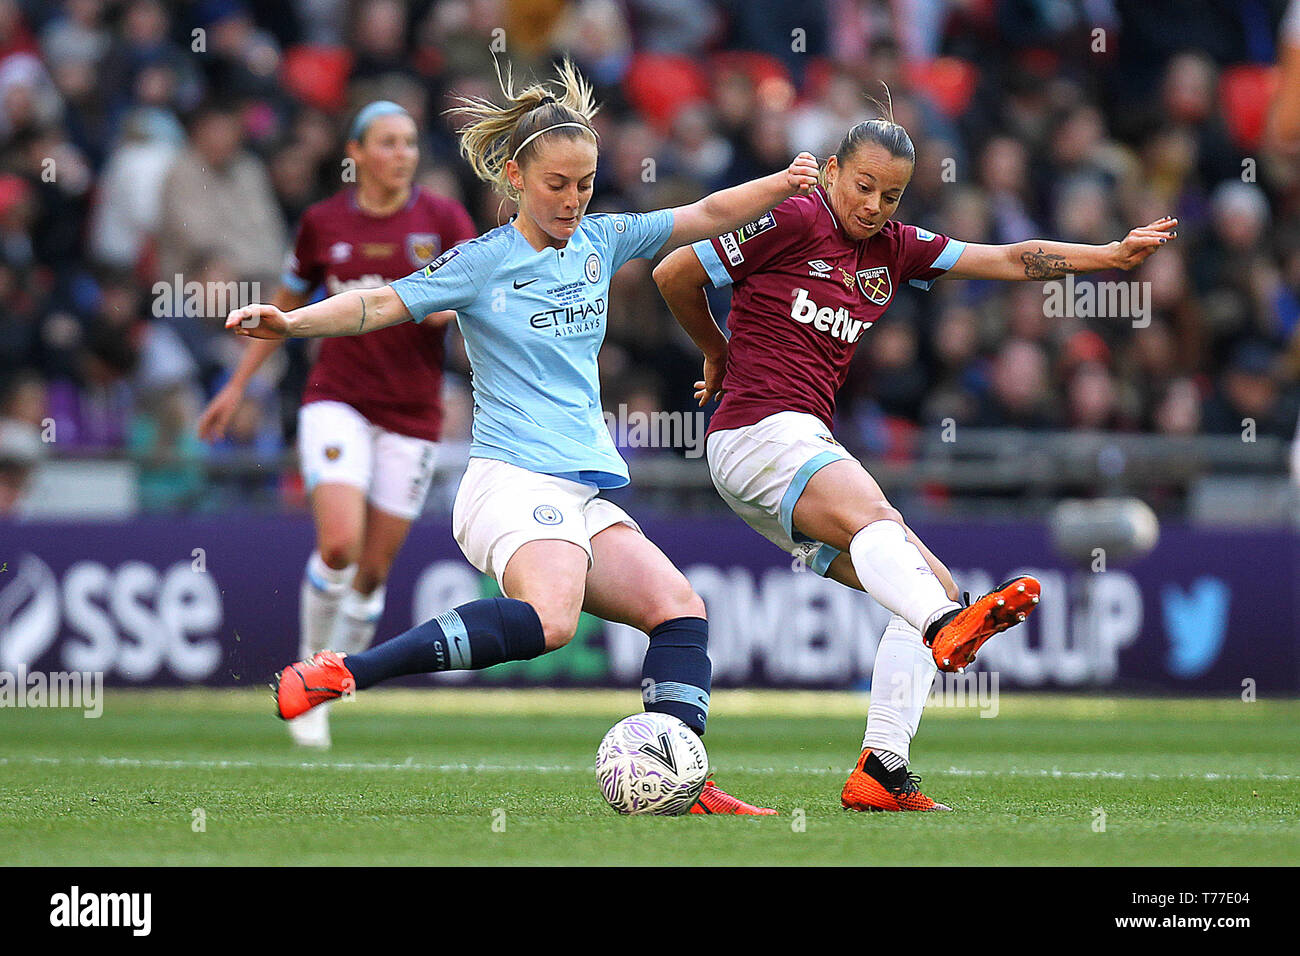 London, UK. 04th May, 2019. Keira Walsh of Manchester City is challenged by Ria Percival of West Ham United during the FA Women's Cup Final match between Manchester City Women and West Ham United Ladies at Wembley Stadium on May 4th 2019 in London, England. Credit: PHC Images/Alamy Live News Stock Photo